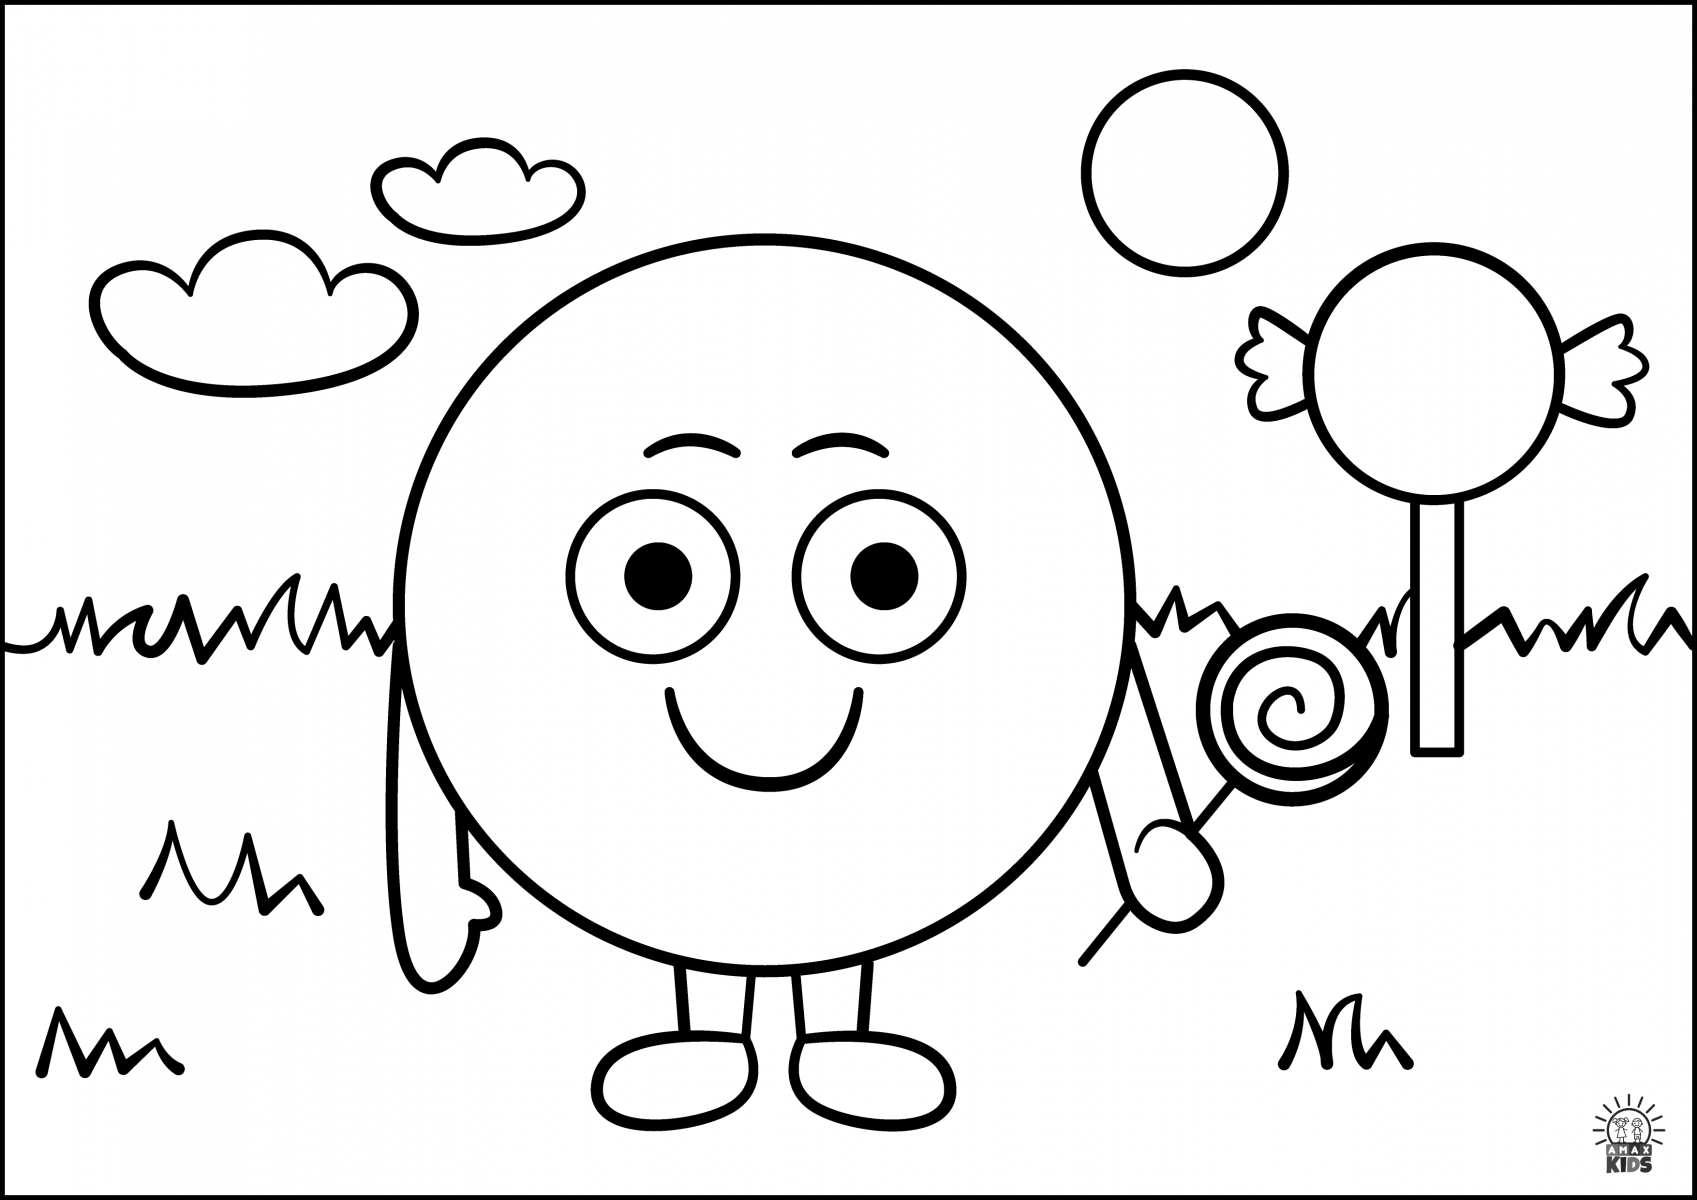 shapes coloring pages